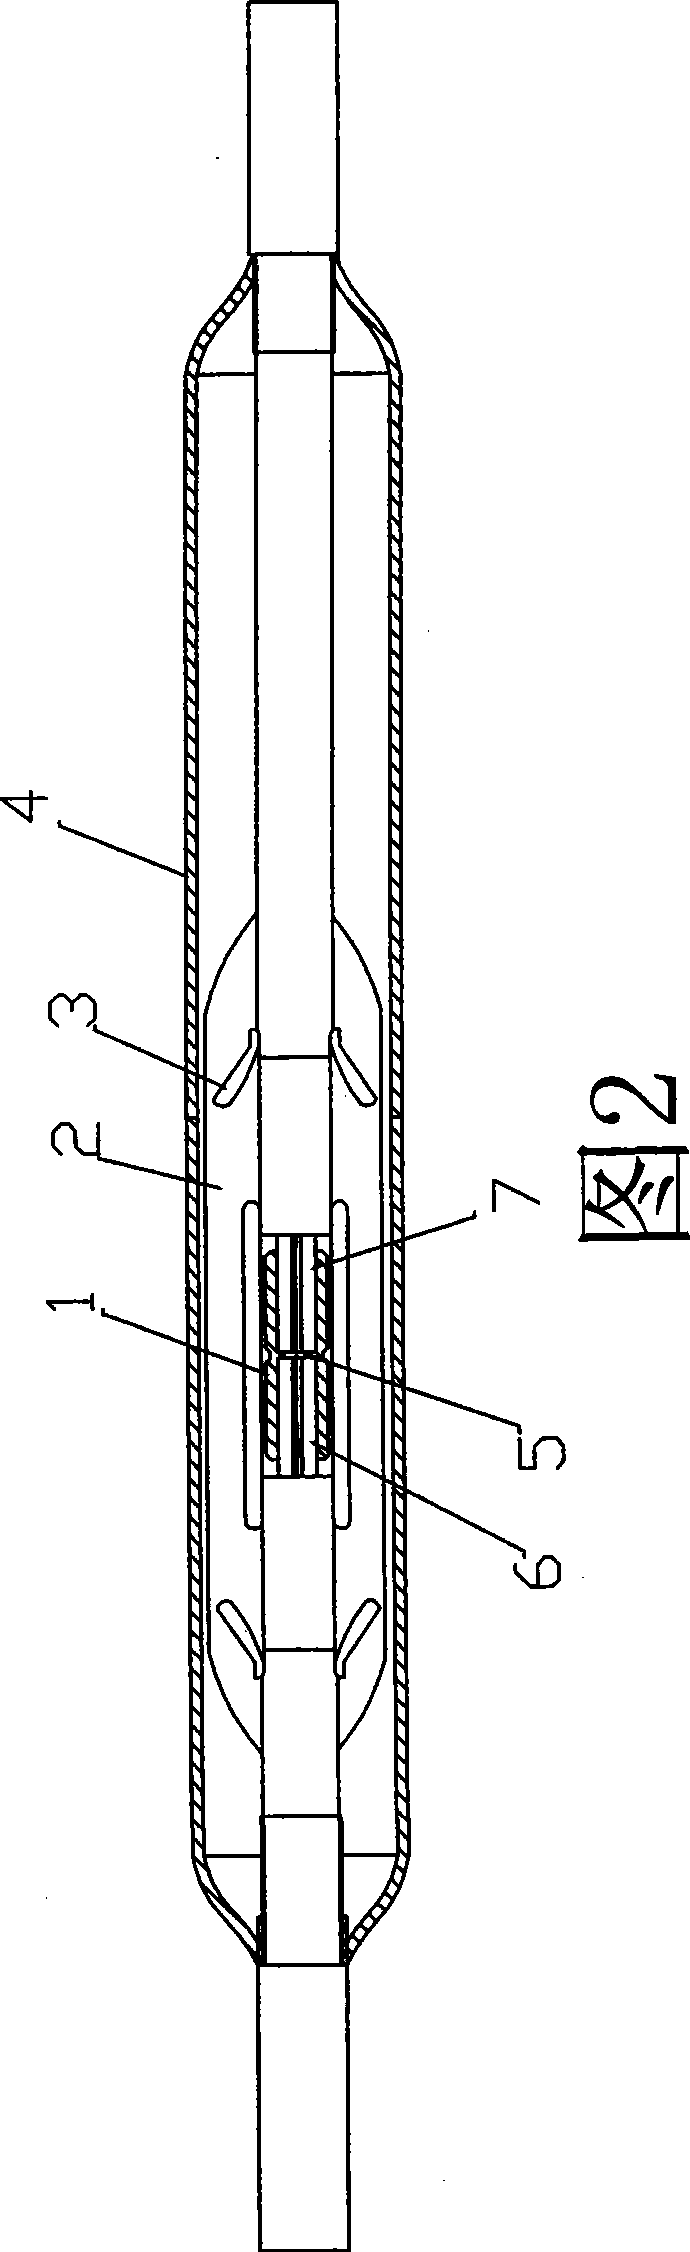 Middle joint of high voltage electric cable for connecting composite optical fiber and connecting method